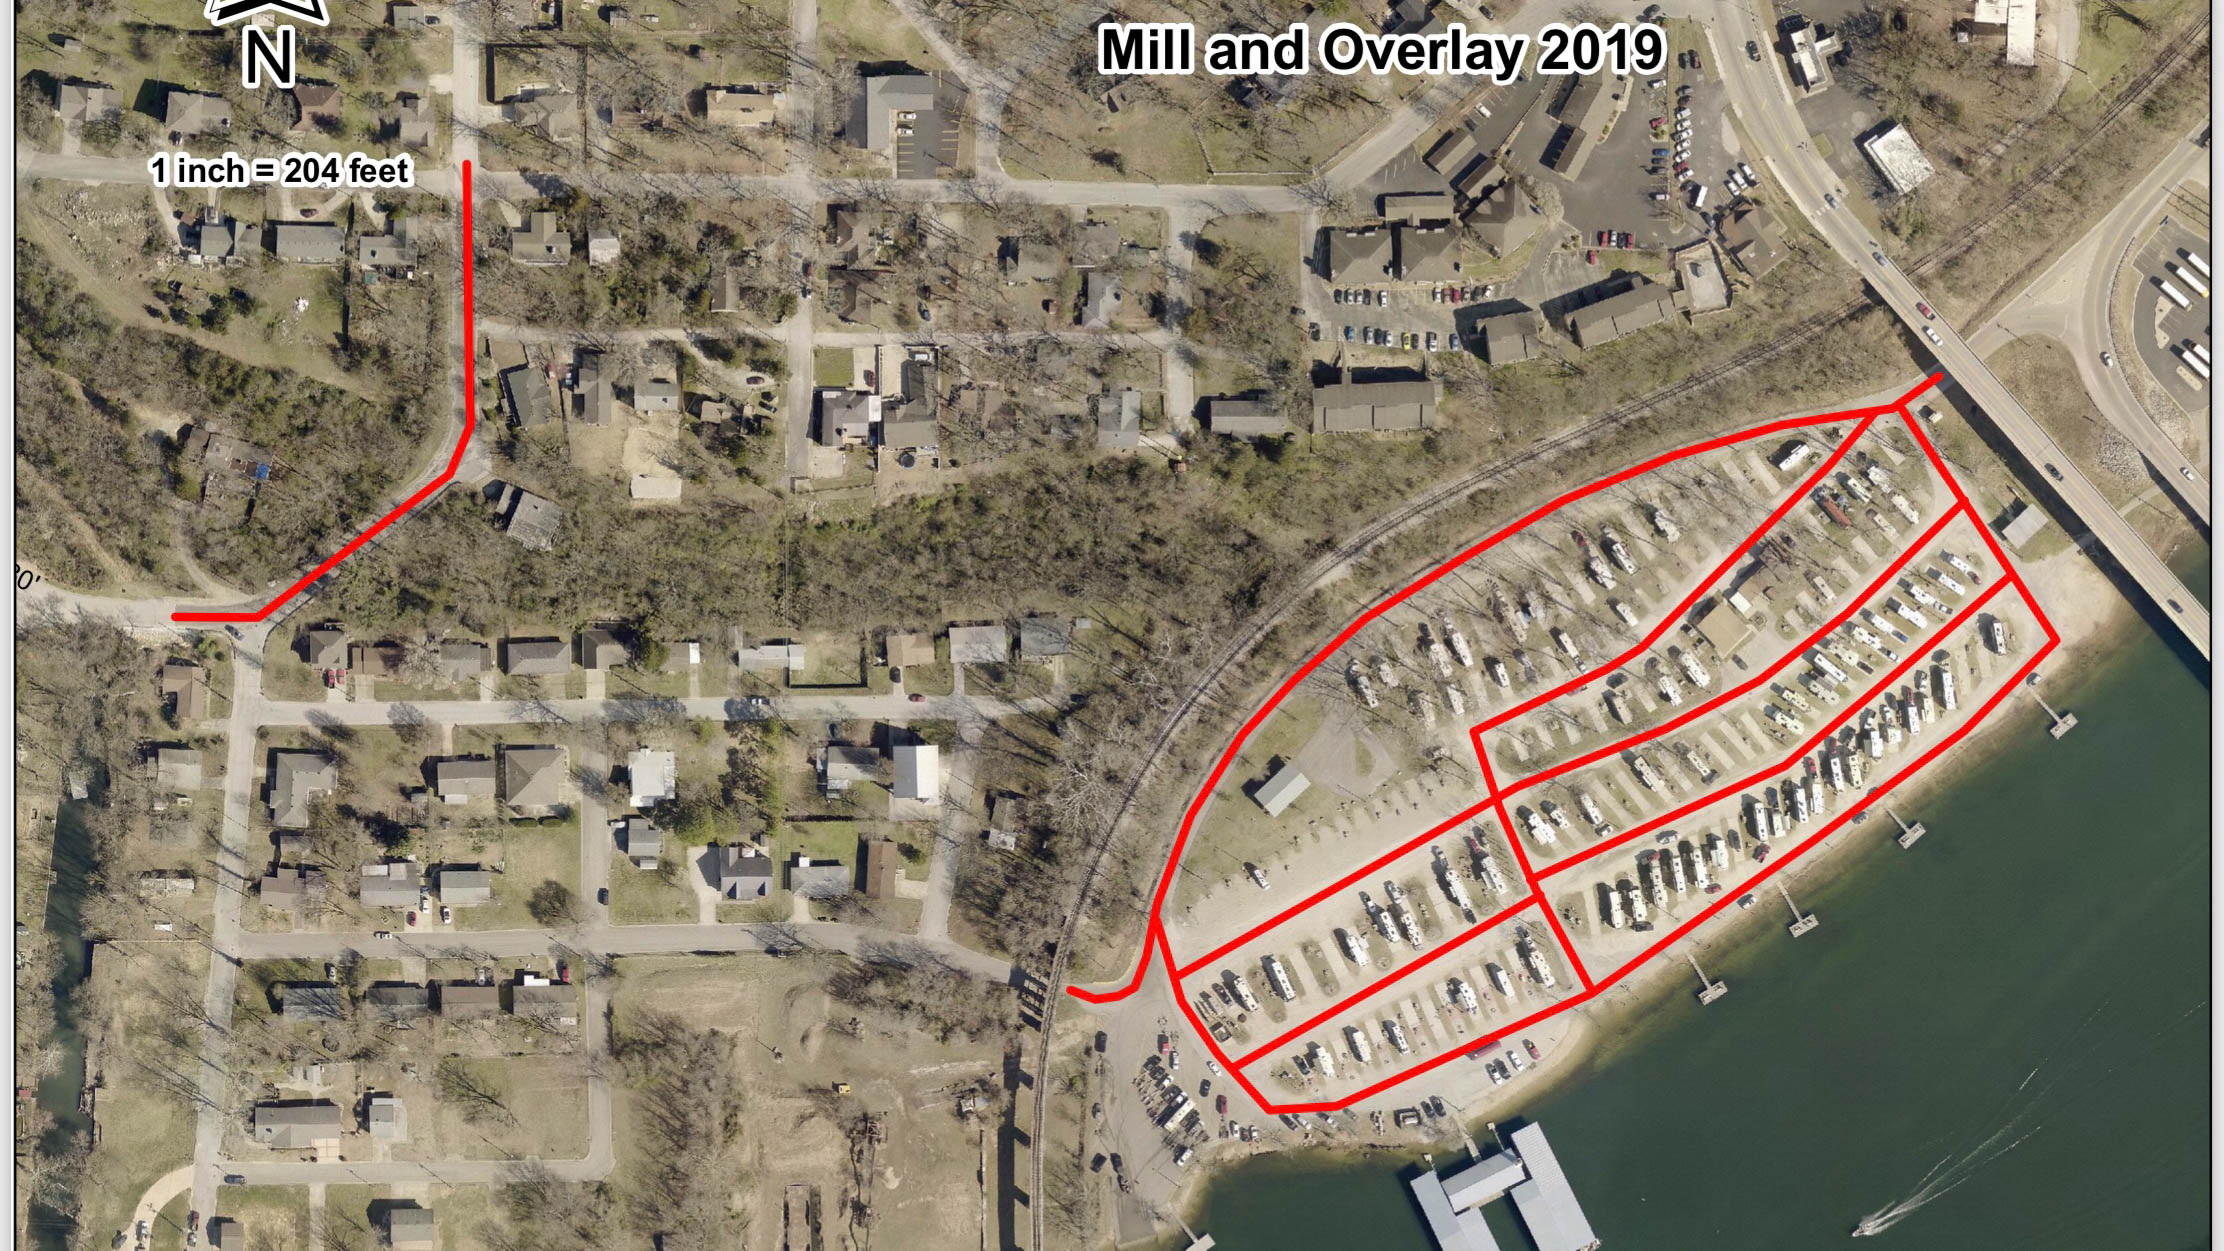 190817 1time Campground Mill and Overlay 2019 - One Way Traffic Near Branson Downtown Next Week for Road Work